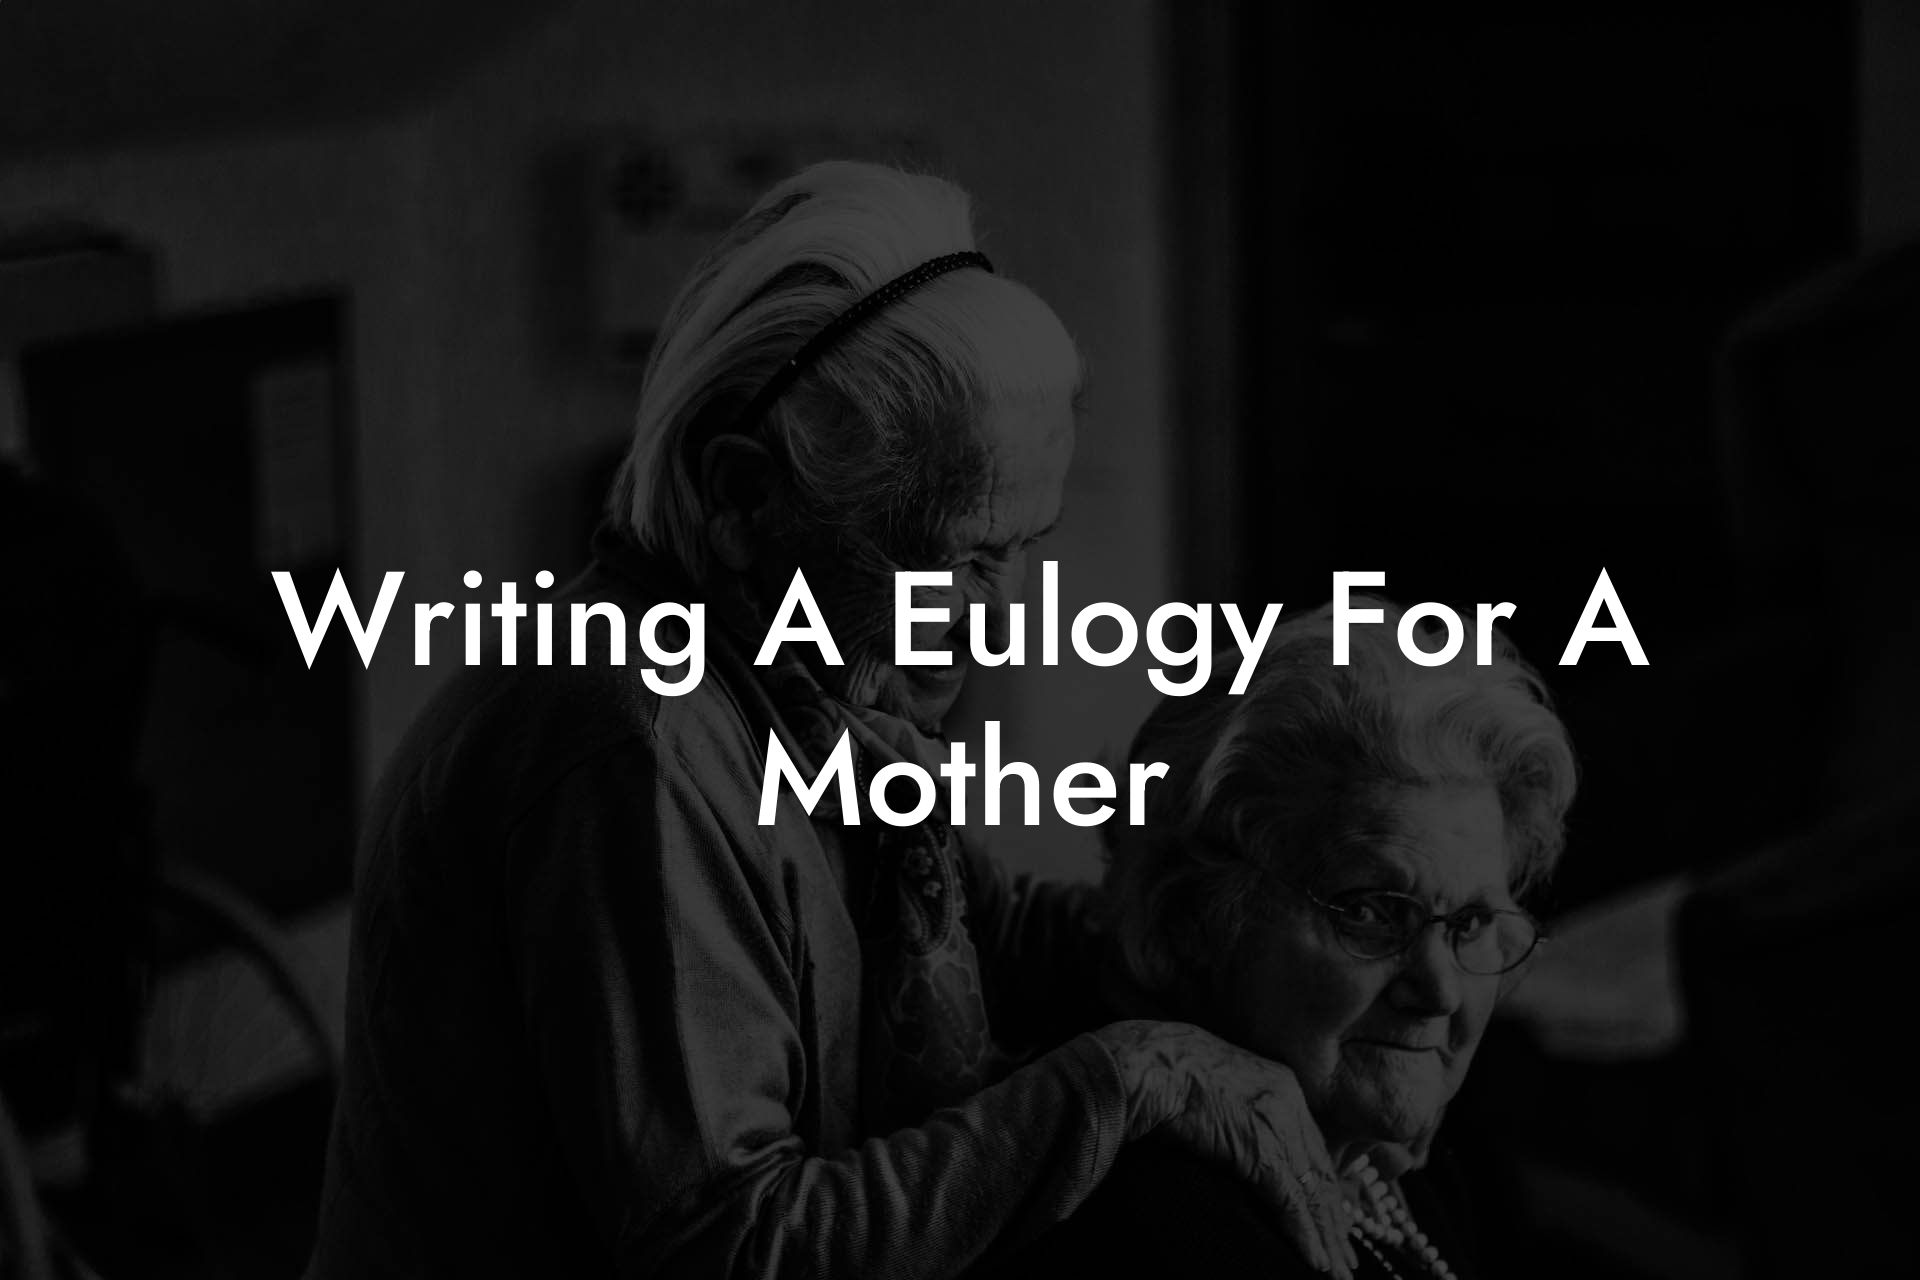 Writing A Eulogy For A Mother